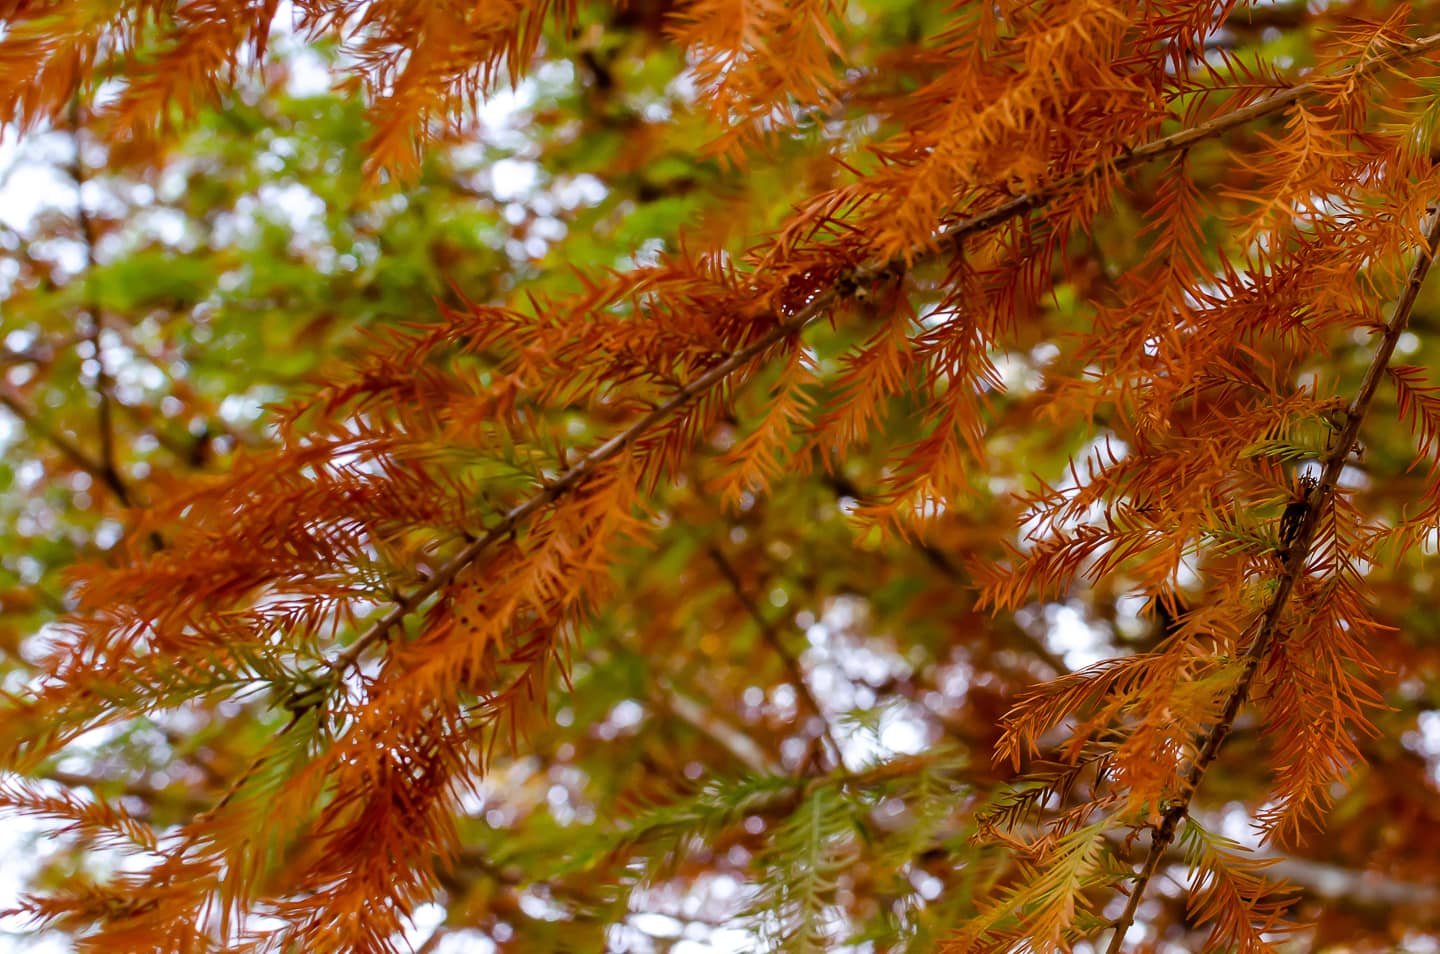 A close up of a Bald Cypress tree with rusty red leaves in fall.